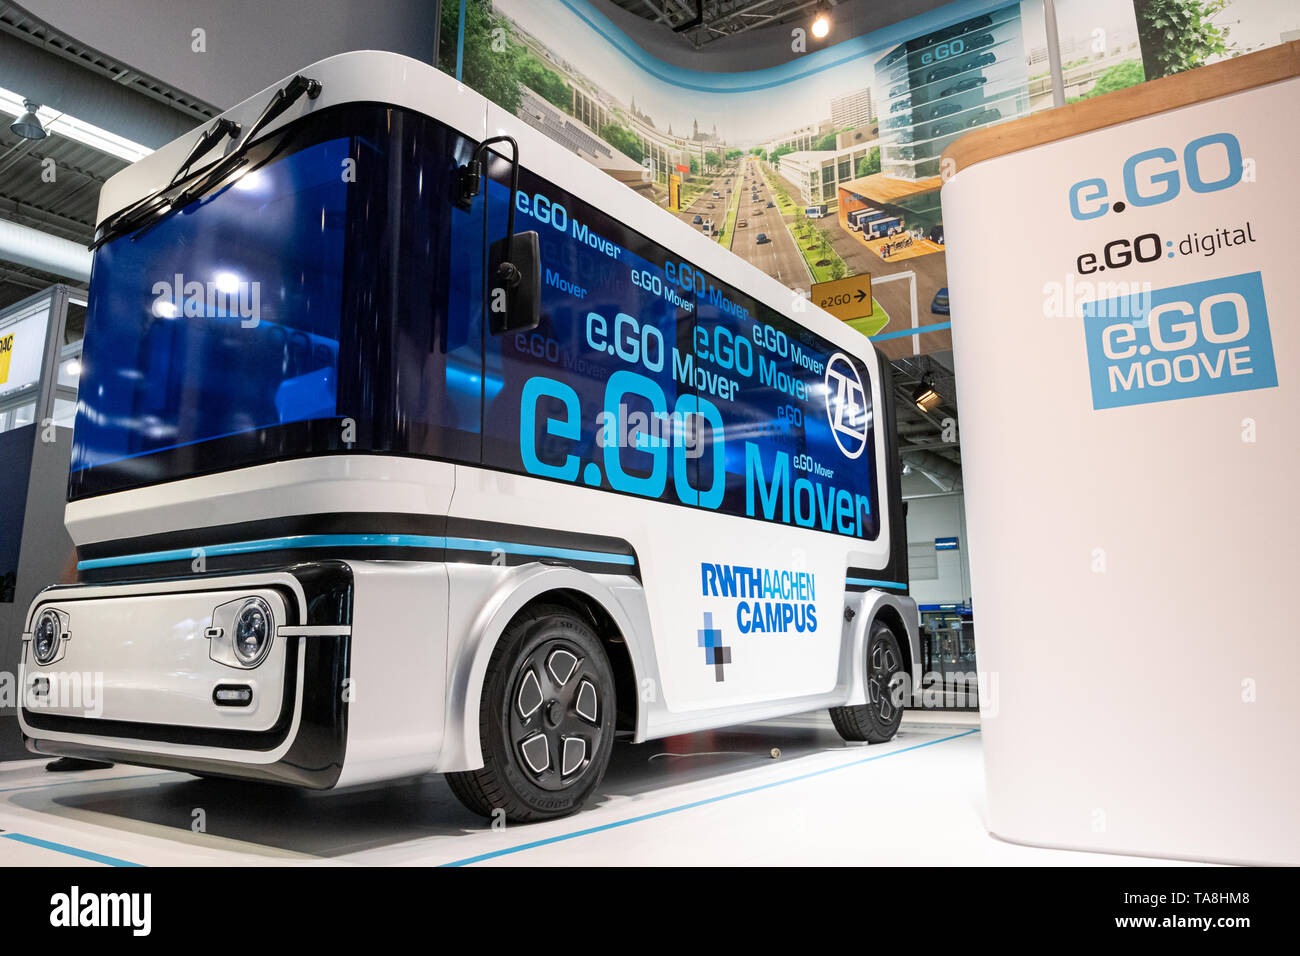 Hannover, Germany. 11th June, 2018. e.GO Mover, multi-purpose fully electric, connected and automated shuttle minibus developed by e.Go Moove GmbH (a joint venture of e.GO Mobile AG, Germany, and ZF Friedrichshafen AH, Germany) presented at CEBIT 2018, international computer expo and Europe's Business Festival for Innovation and Digitization. Credit: Christian Lademann Stock Photo